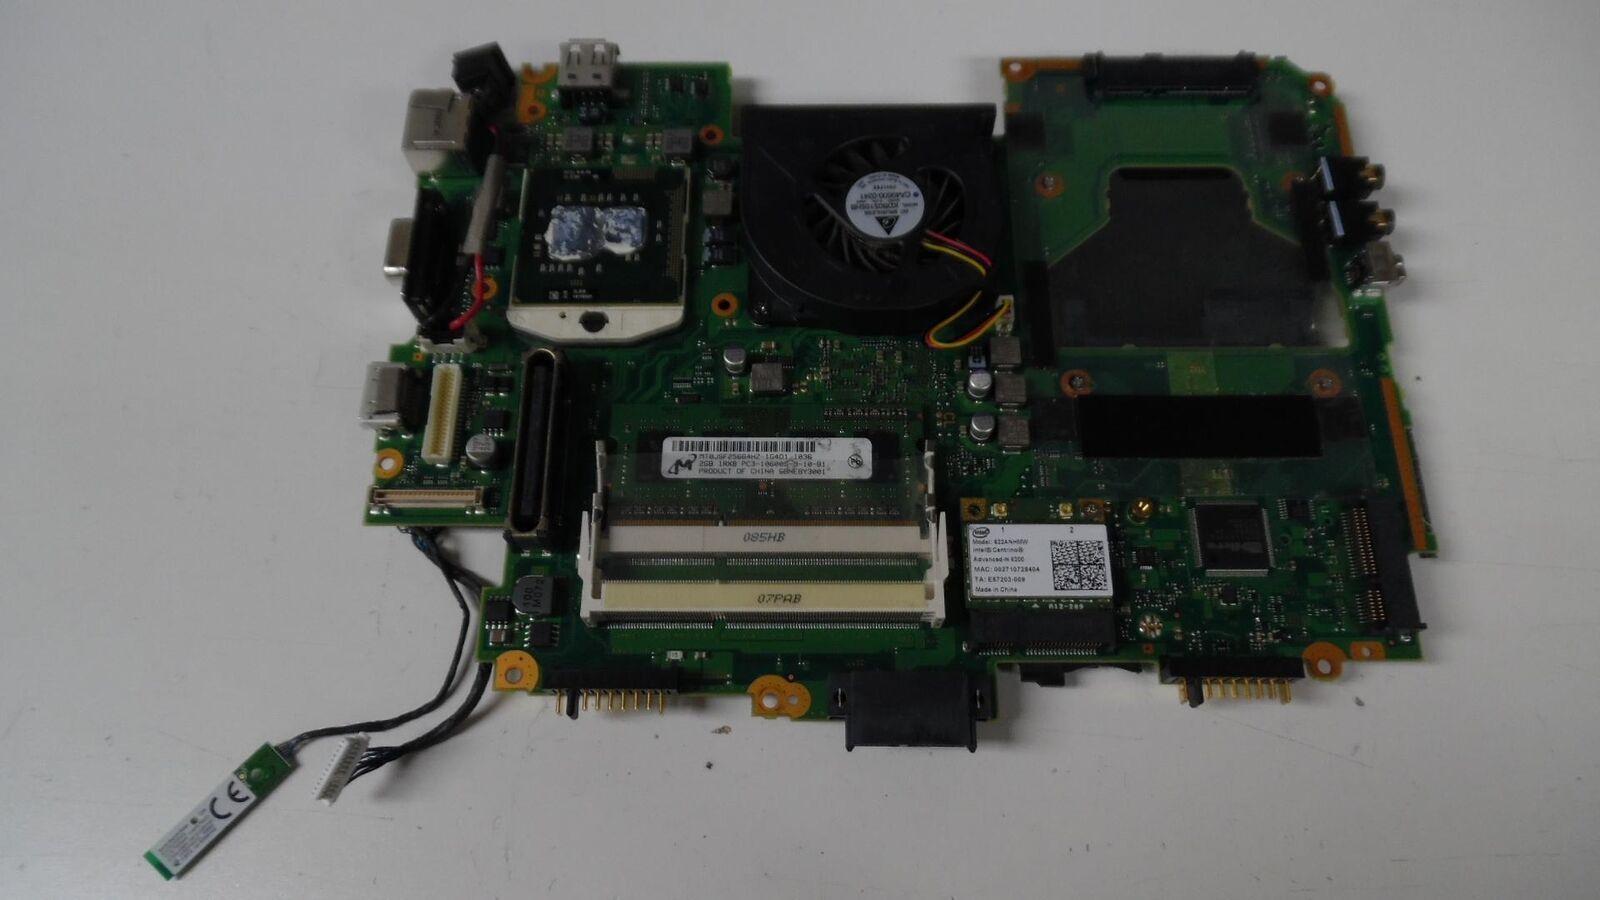 Fujitsu LifeBook T730 - i3-370M 2.4GHz Motherboard - CP470095-Z2 / Tested